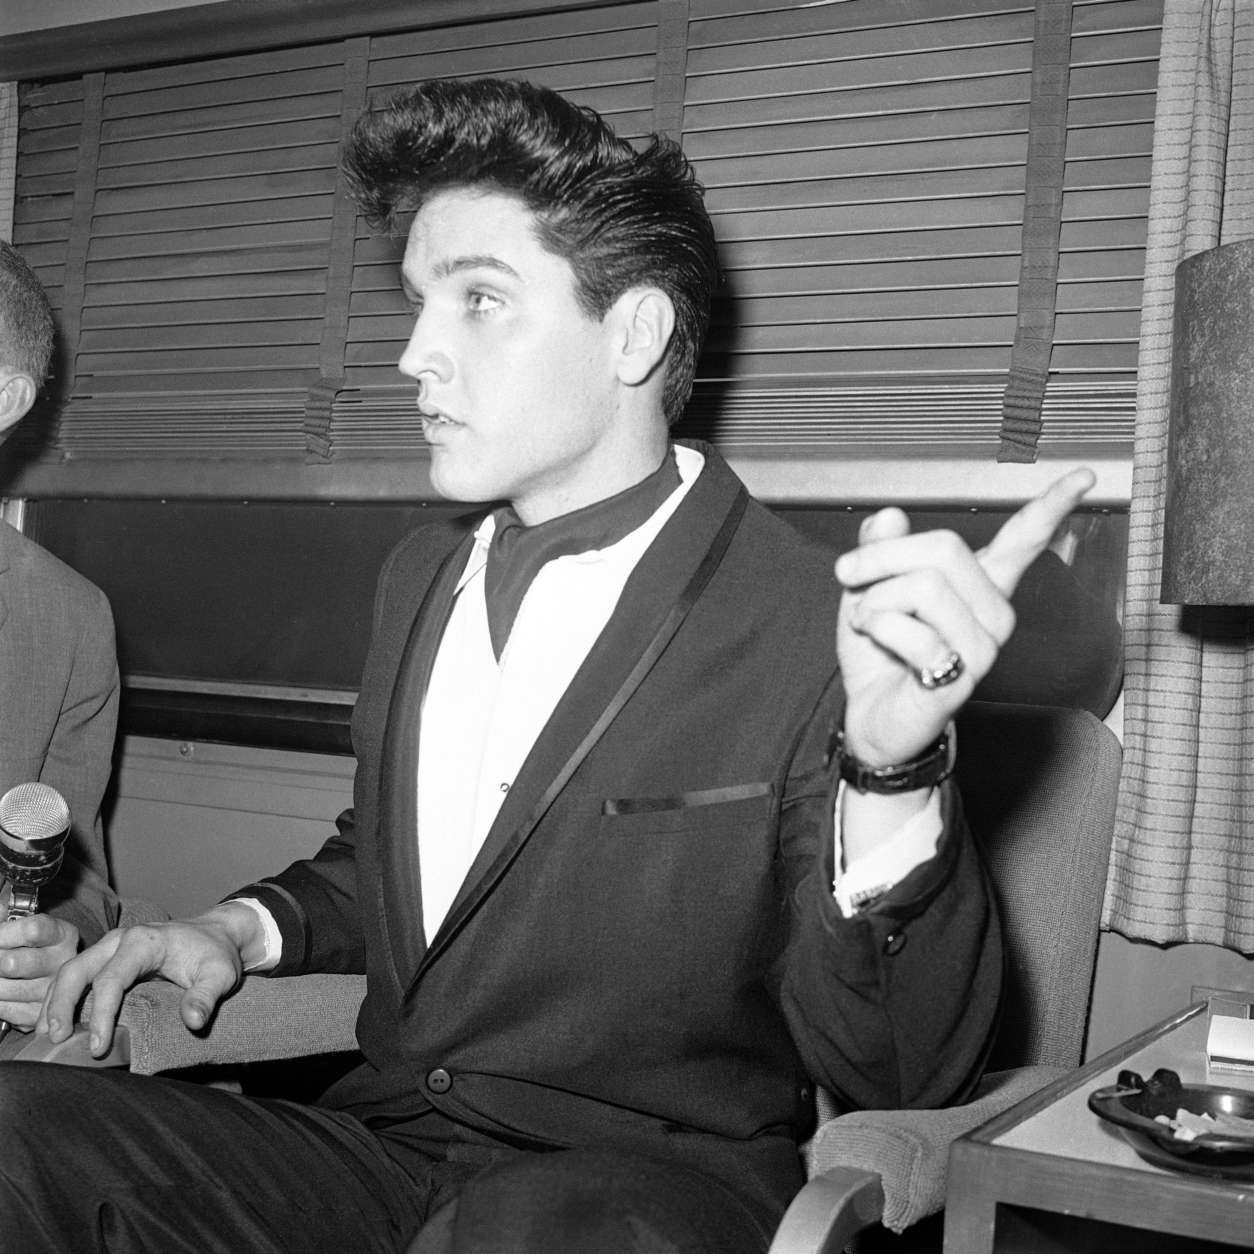 Singer Elvis Presley gestures during a press conference inside his private railroad car at Los Angeles Union Station, California, United States as he arrived on April 20, 1960 to make a movie. (AP Photo/HPM)